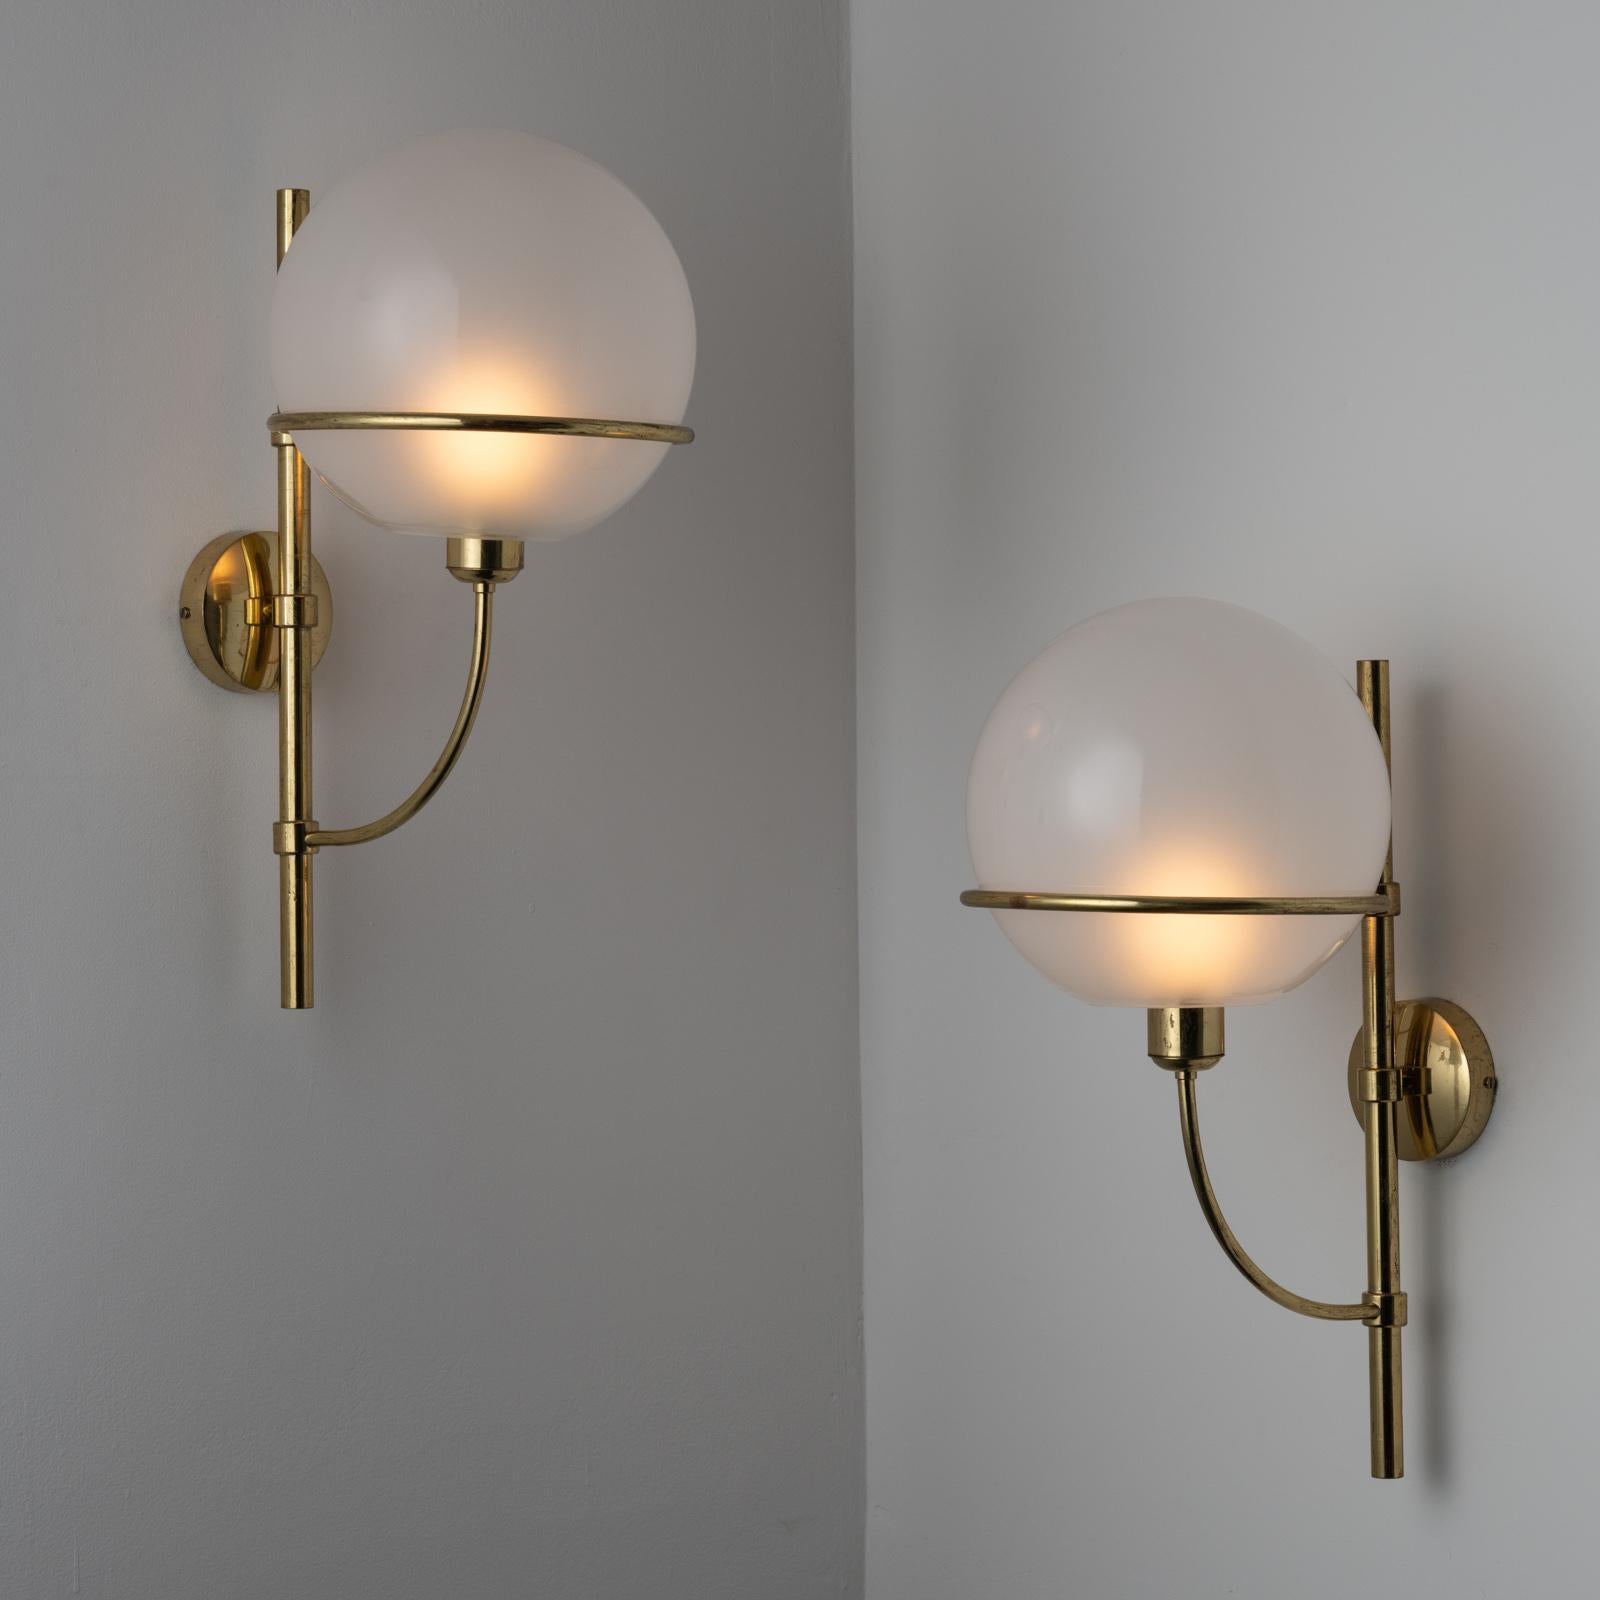 Model 160 'Lyndon' Sconces by Vico Magistretti for Oluce. Designed and manufactured in Italy, circa the 1970s. Polished brass armatures which are vertically adjustable hold an etched glass globe. Each sconce holds one E27 socket type, adapted for